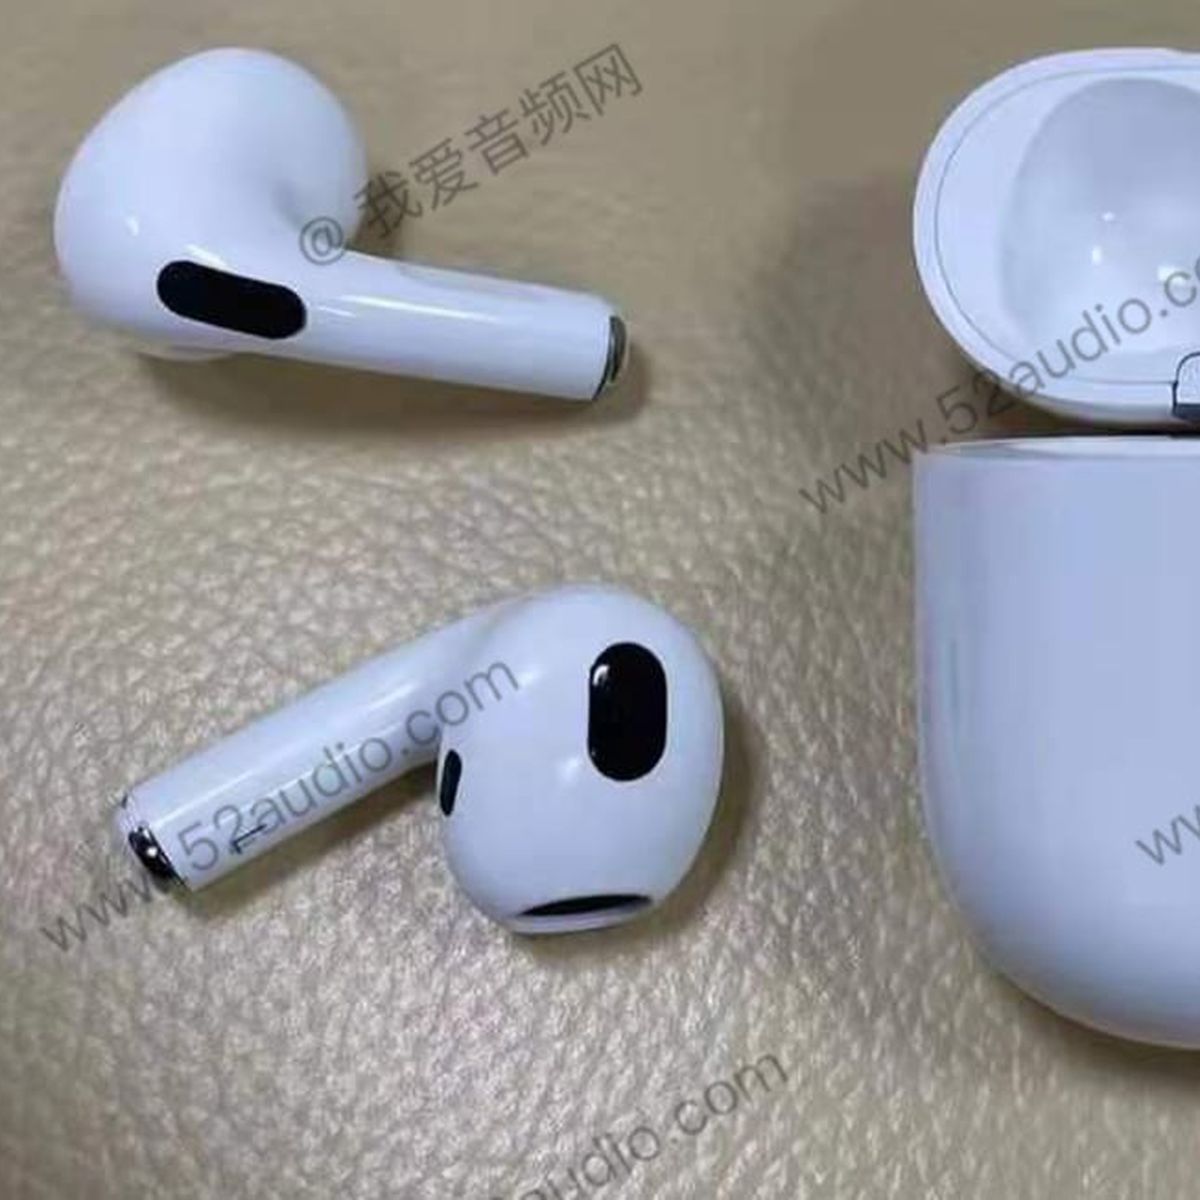 AirPods 3 launch did not happen at iPhone 13 event, so when are they coming?